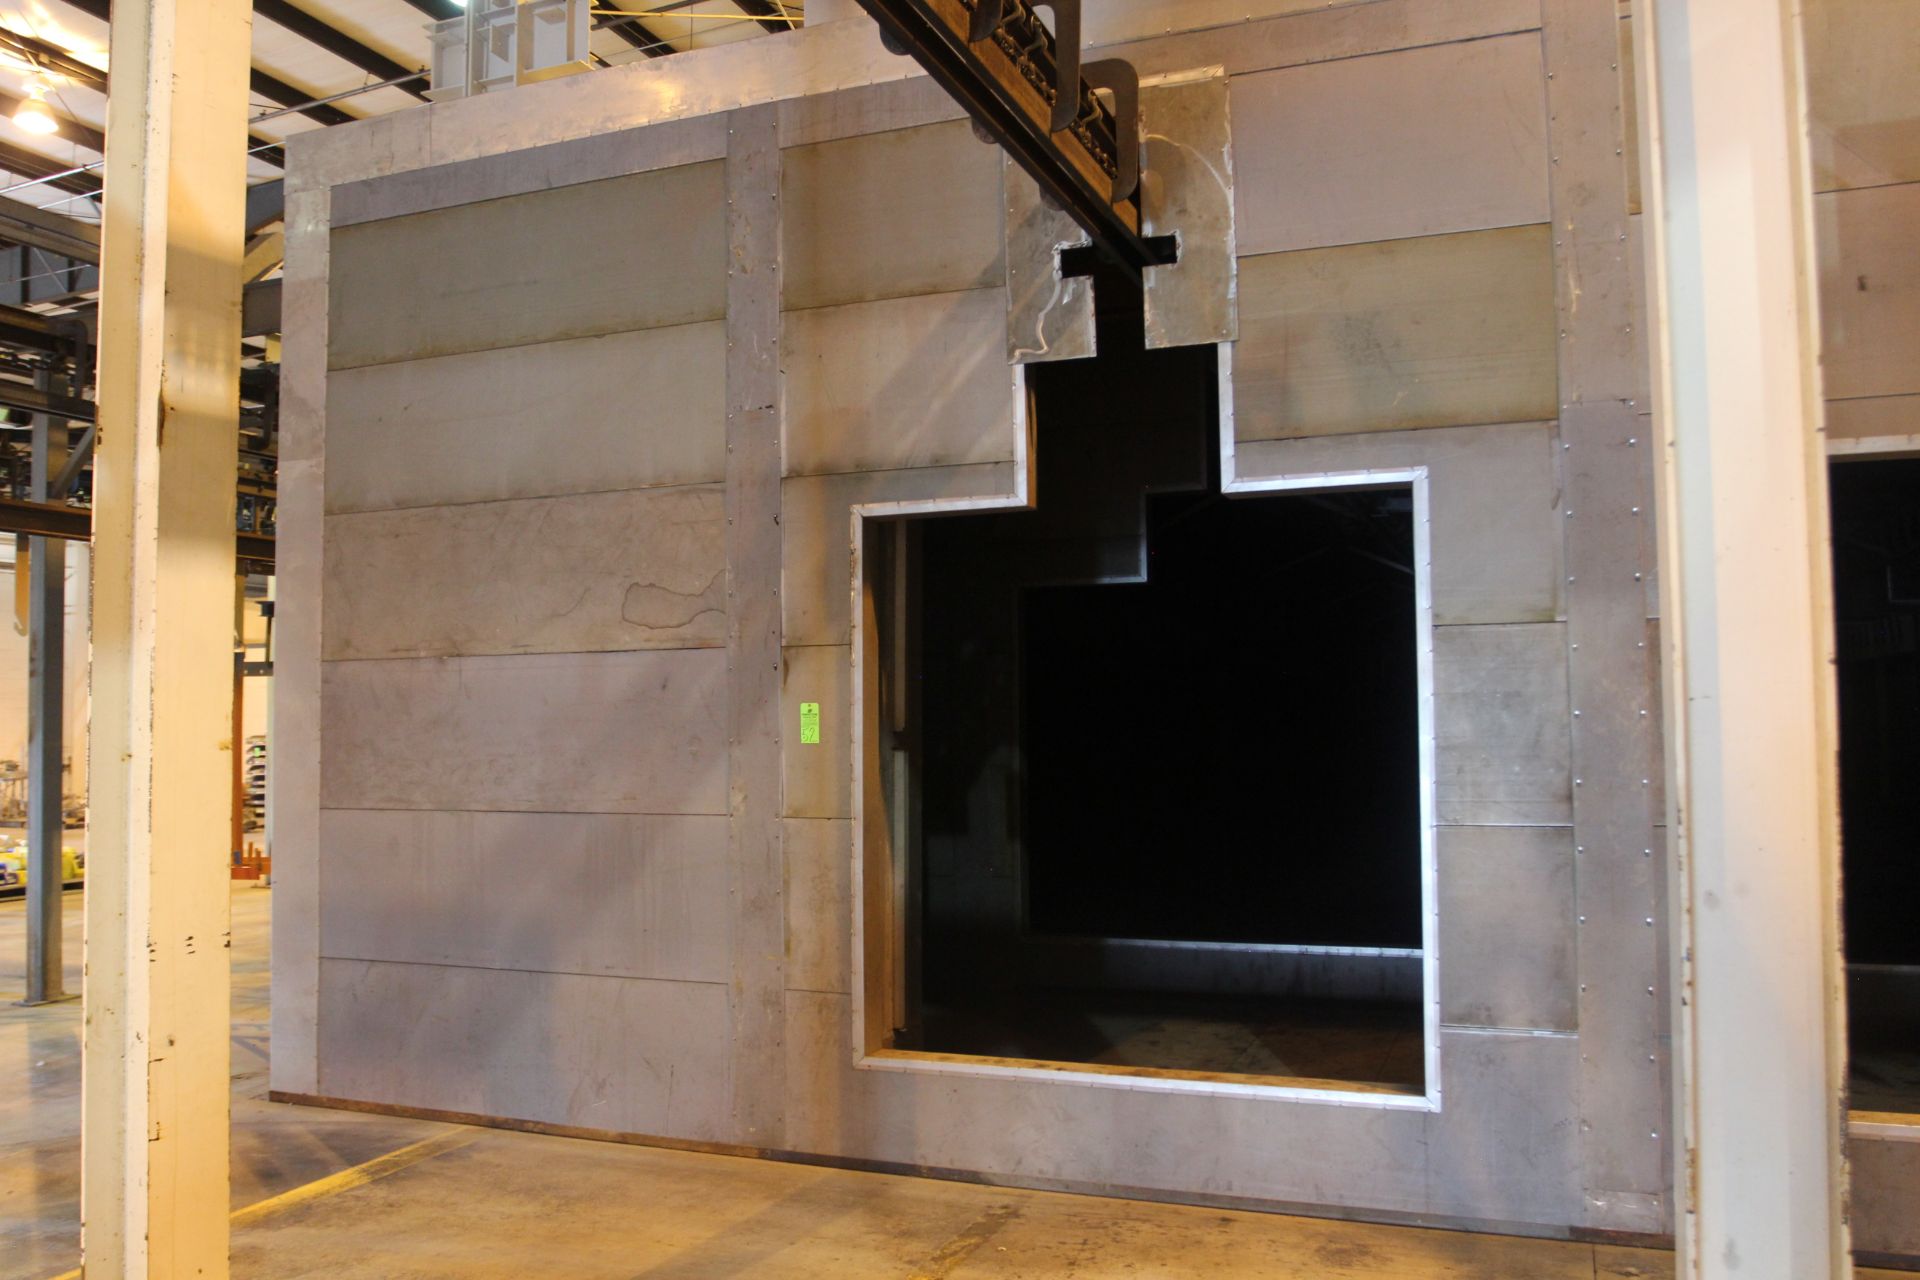 CURE OVEN  #1;  W/ (COMMON CENTER WALL); 151' L X 18' W X 14'10'' H; 4.5 MILLION BTU/HR BURNER - Image 8 of 8